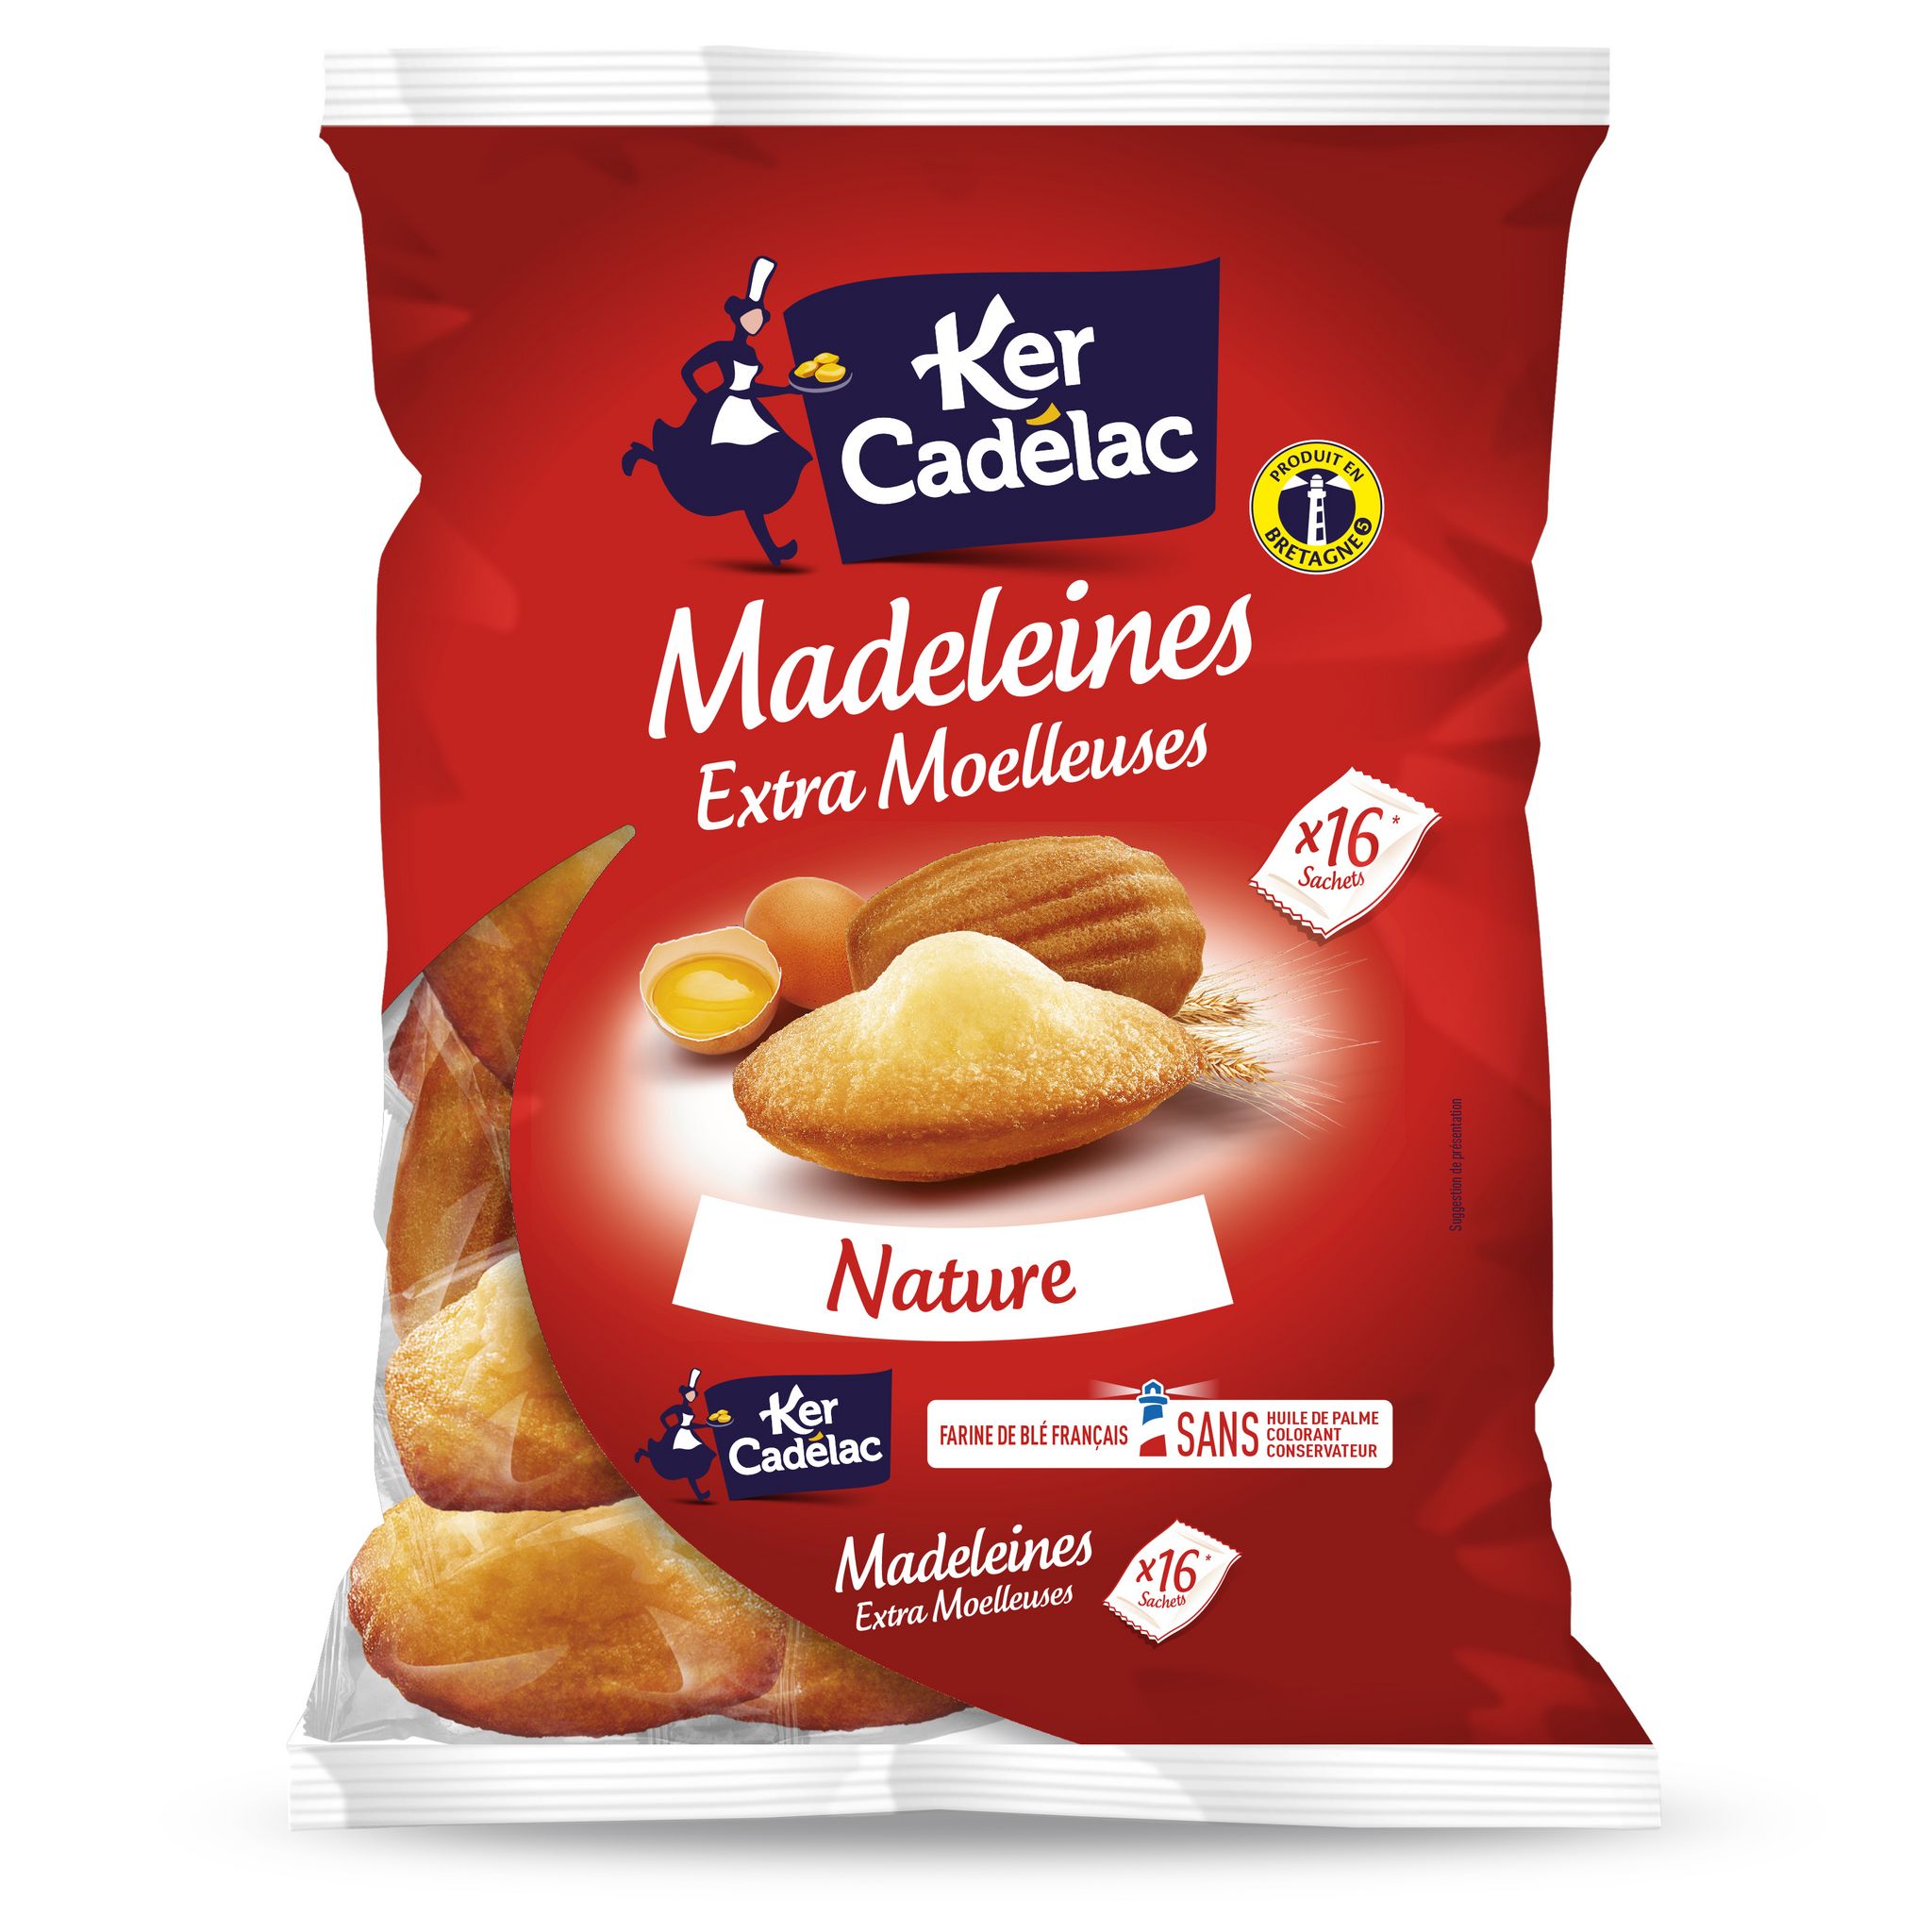 KER CADELAC Madeleines extra moelleuses sachets individuels 16 madeleines  400g pas cher 